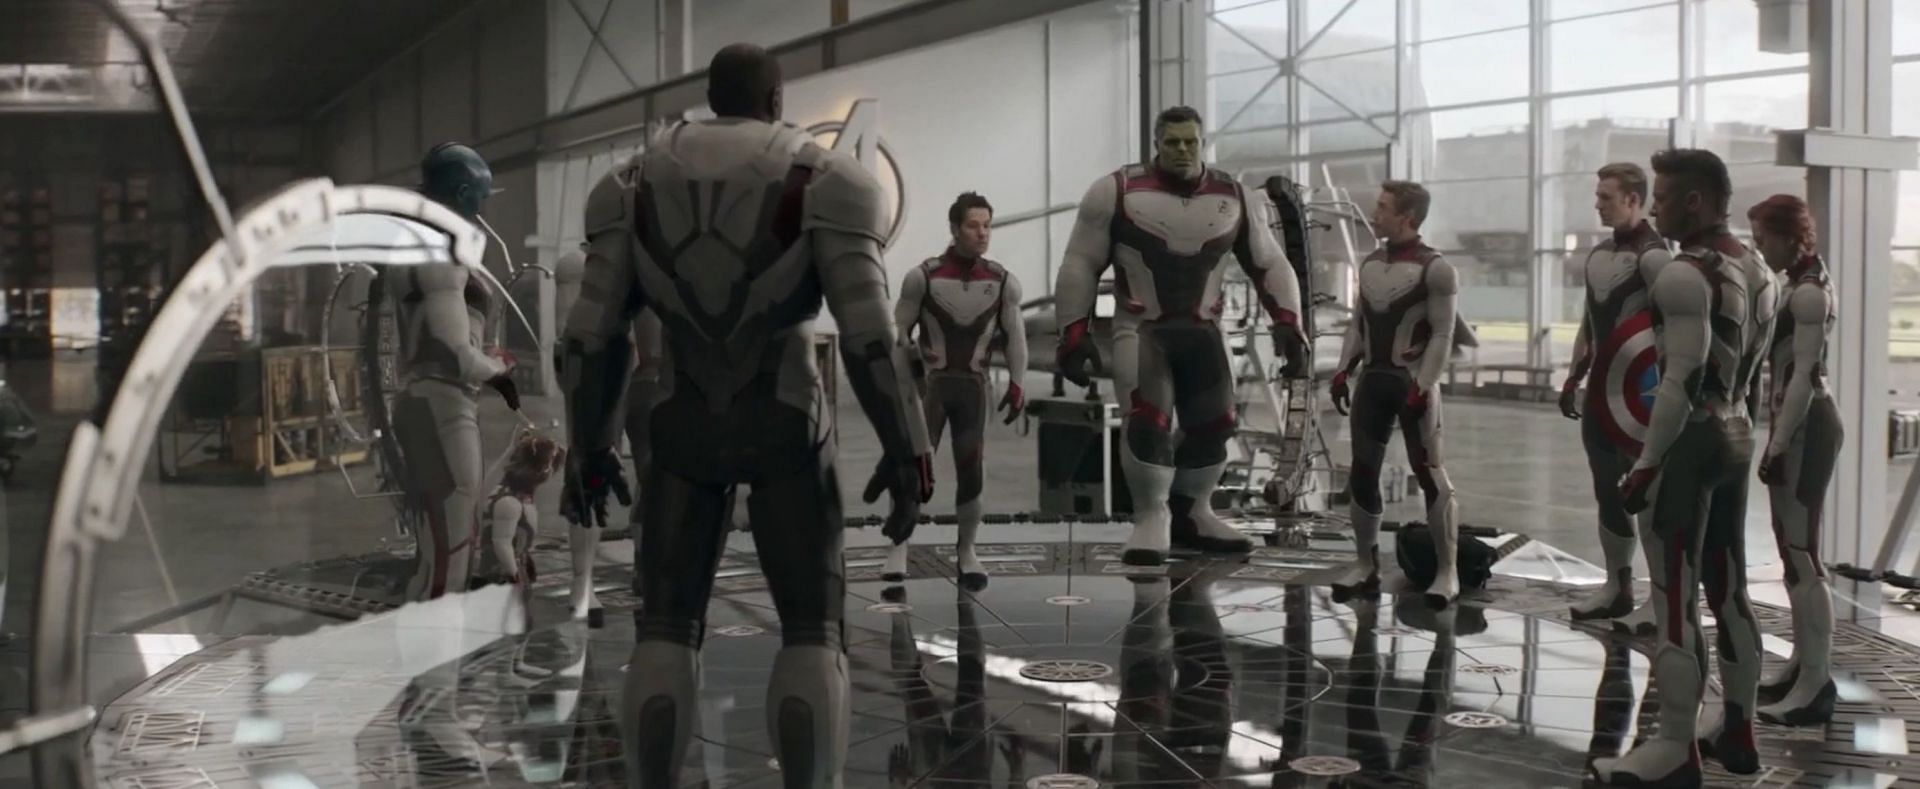 Avengers: Endgame sets the stage for Ant-Man